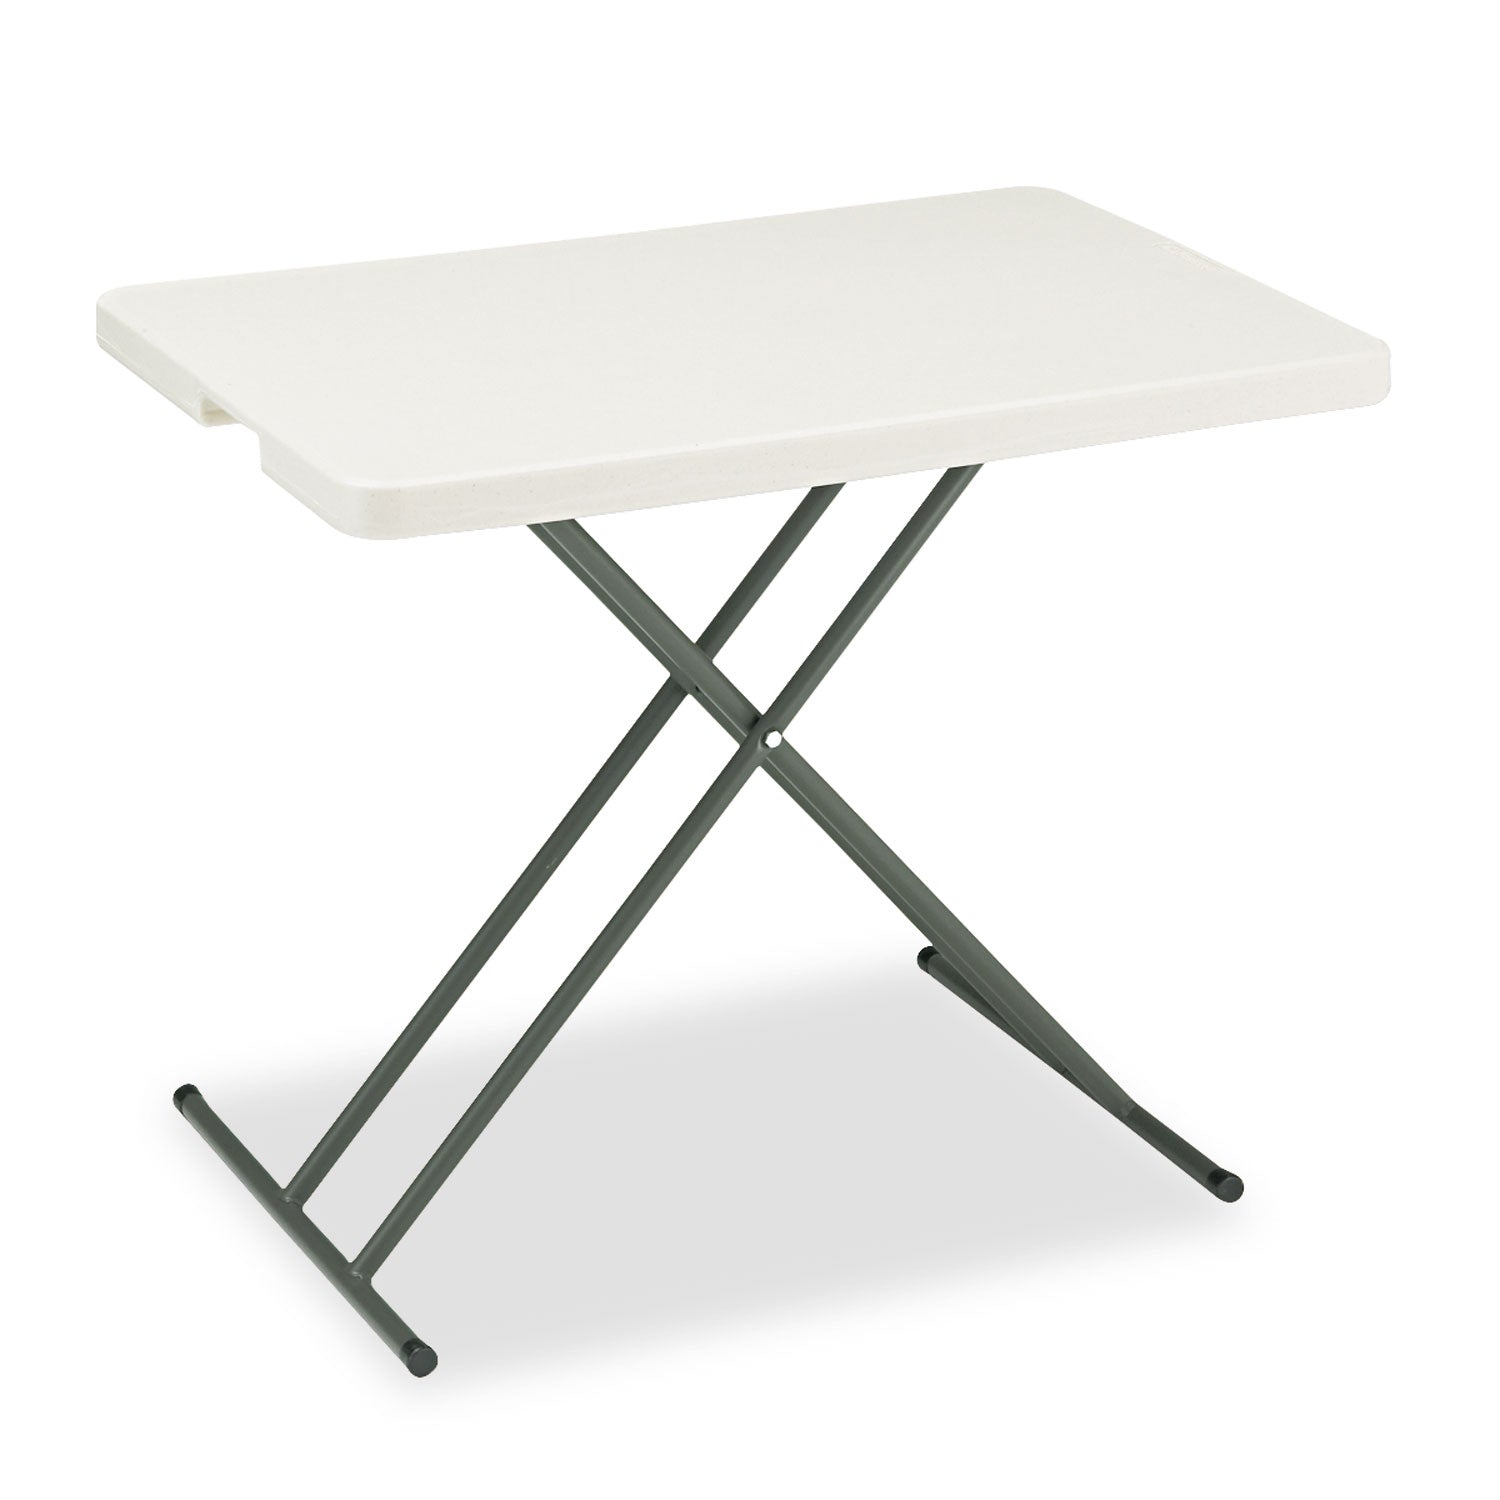 IndestrucTable Classic Personal Folding Table, 30" x 20" x 25" to 28", Platinum/Gray - 1